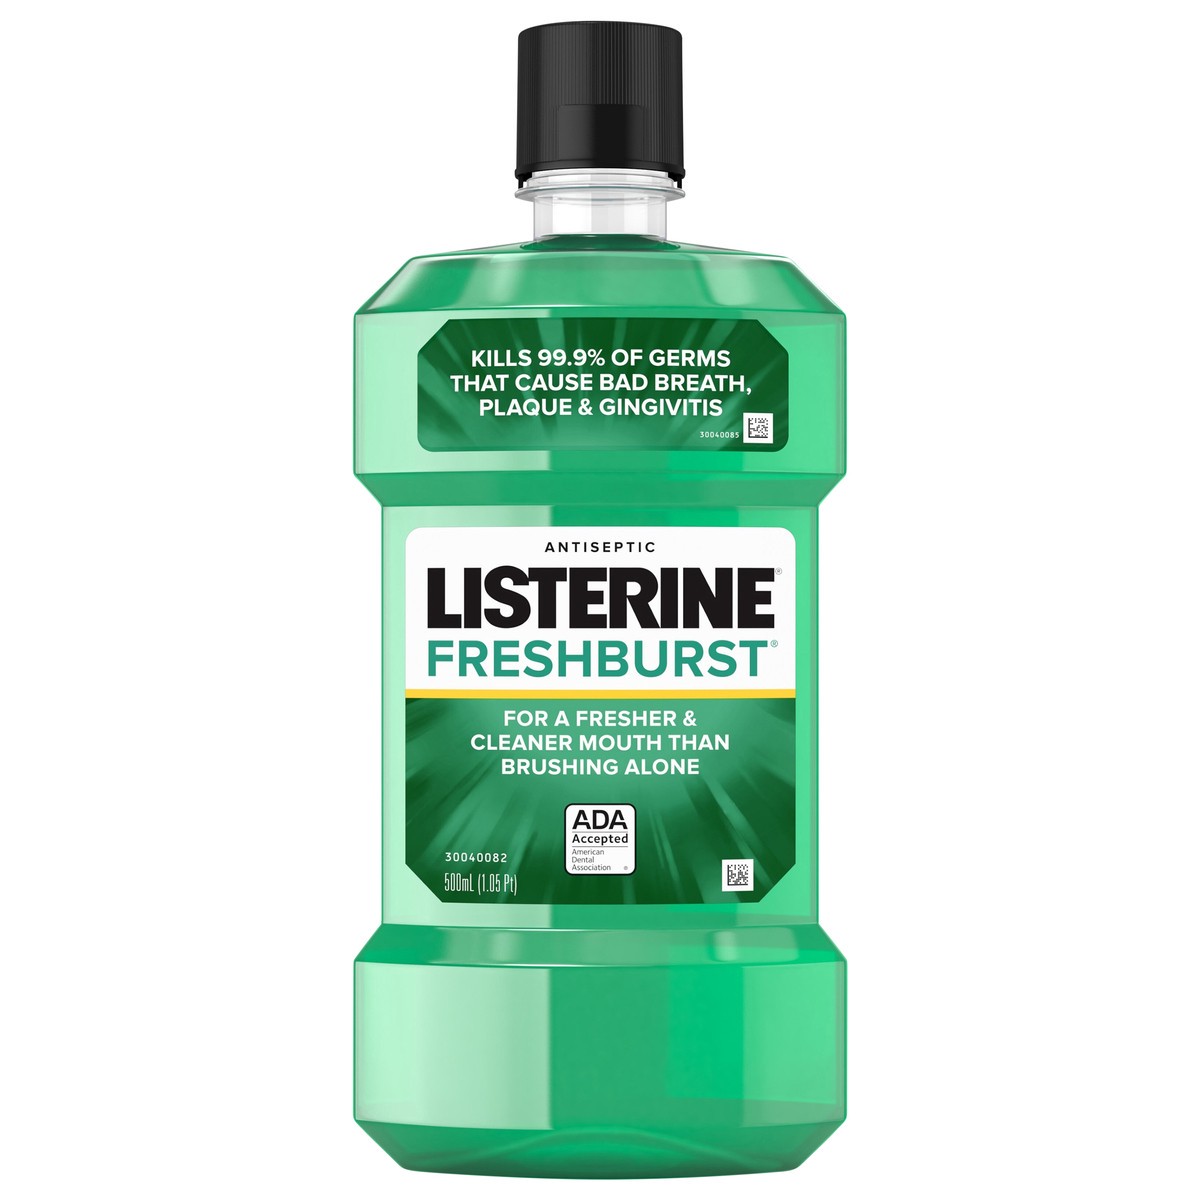 slide 10 of 12, Listerine Freshburst Antiseptic Mouthwash for Bad Breath, Kills 99% of Germs that Cause Bad Breath & Fight Plaque & Gingivitis, ADA Accepted Mouthwash, Spearmint, 500 mL, 500 ml